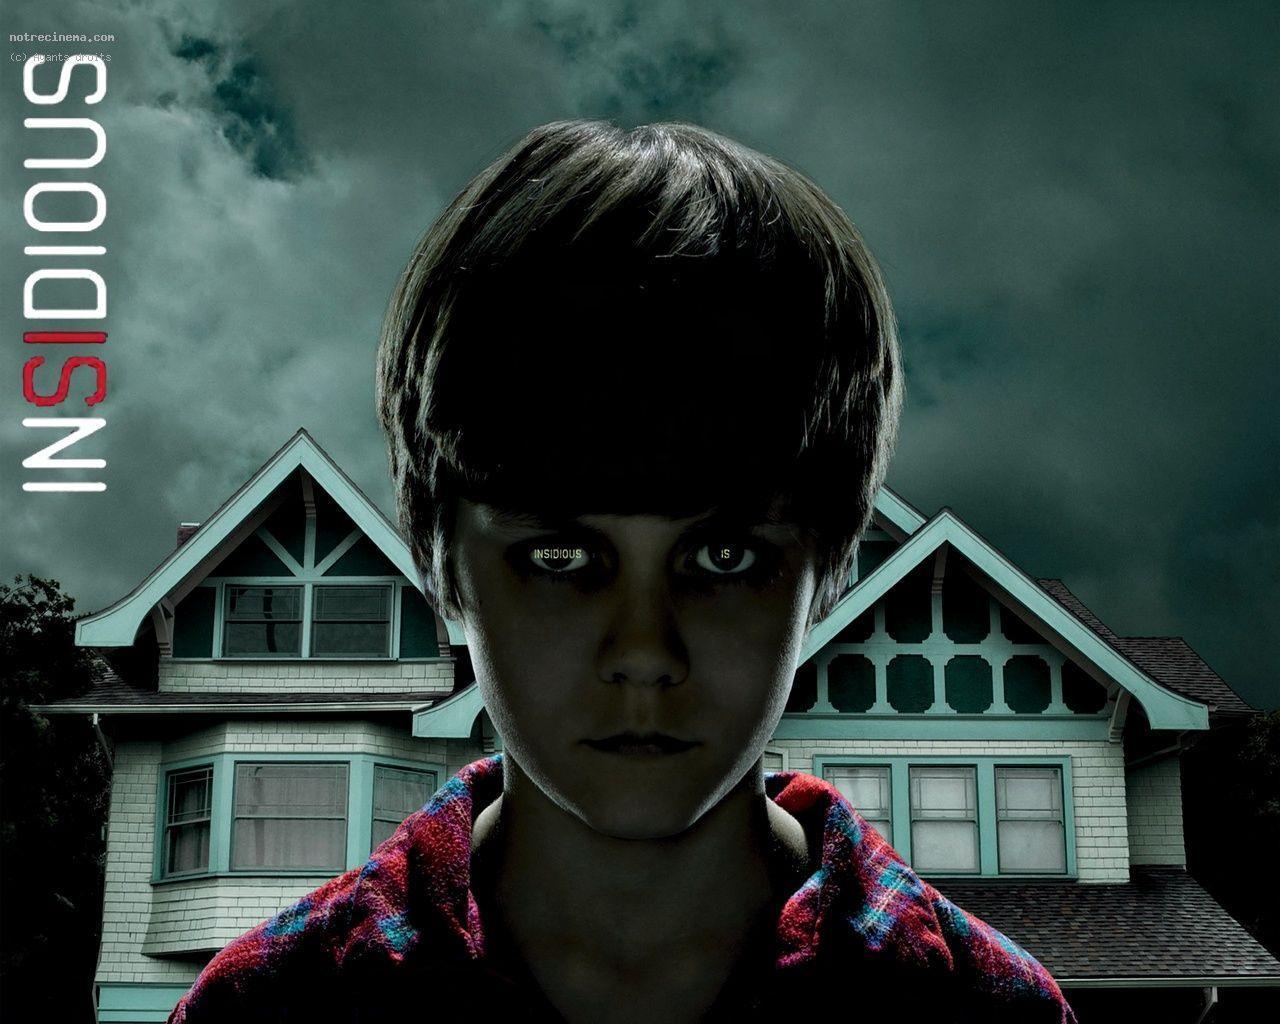 INSIDIOUS image Insidious Wallpaper HD wallpaper and background